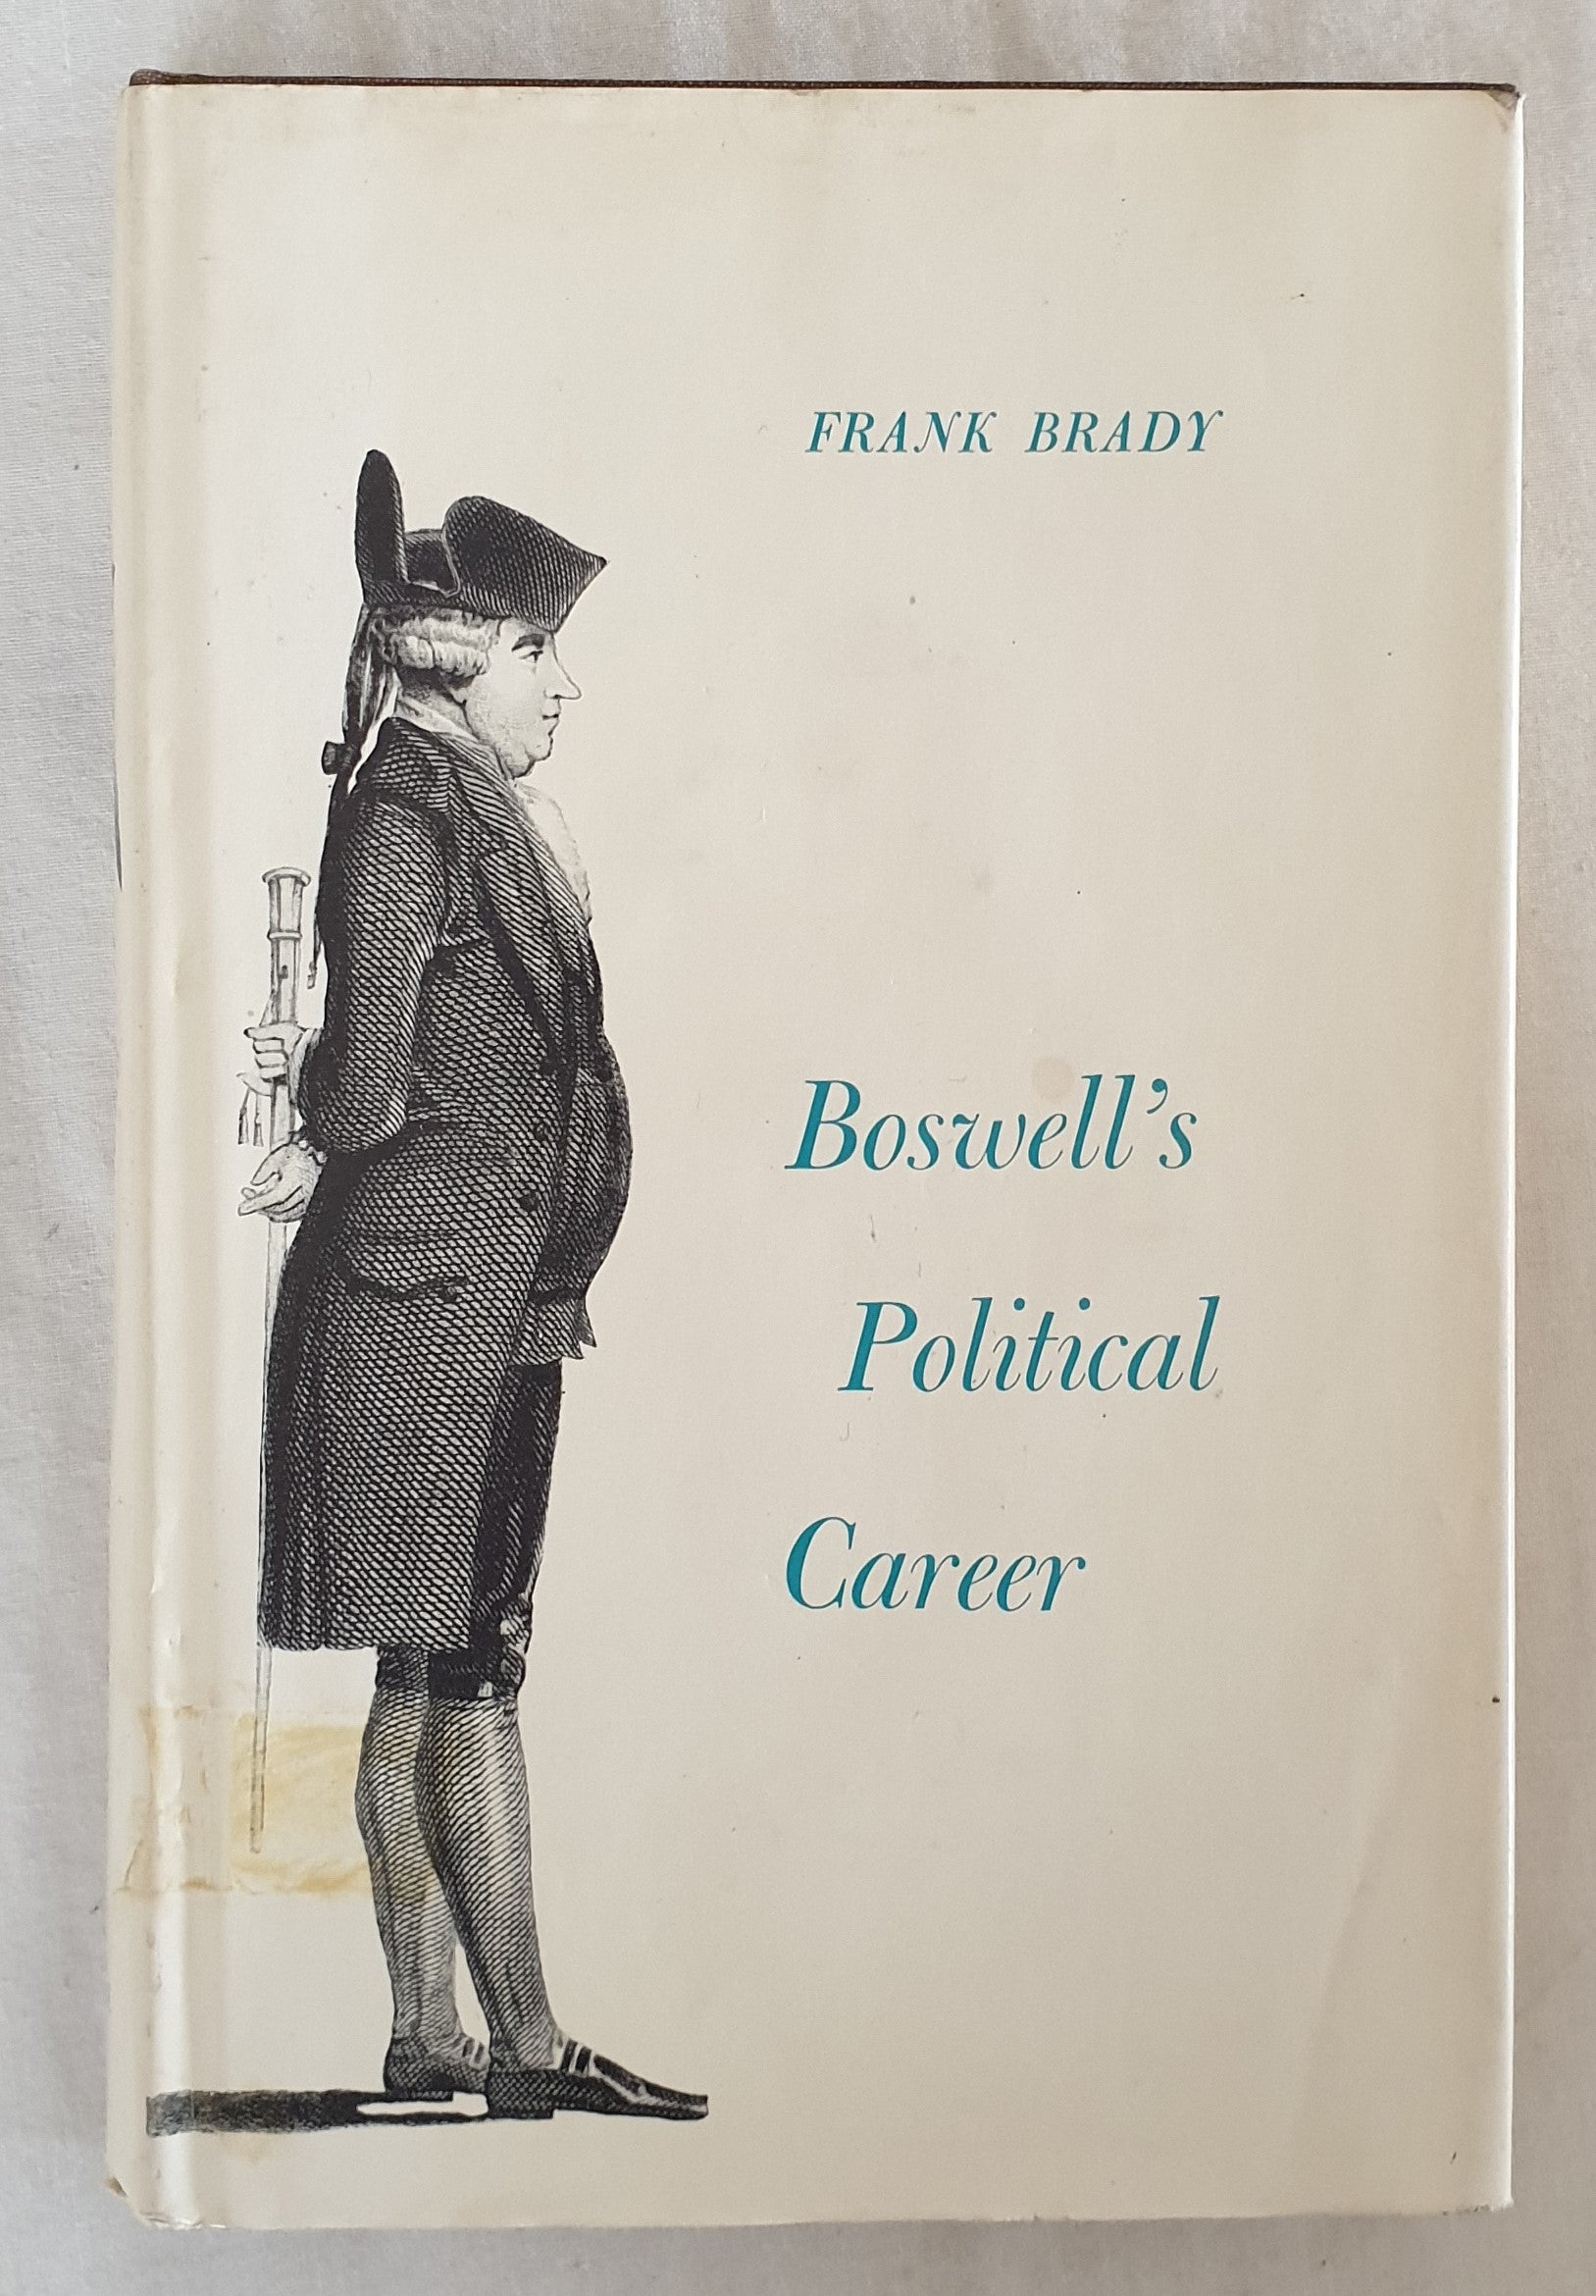 Boswell's Political Career by Frank Brady